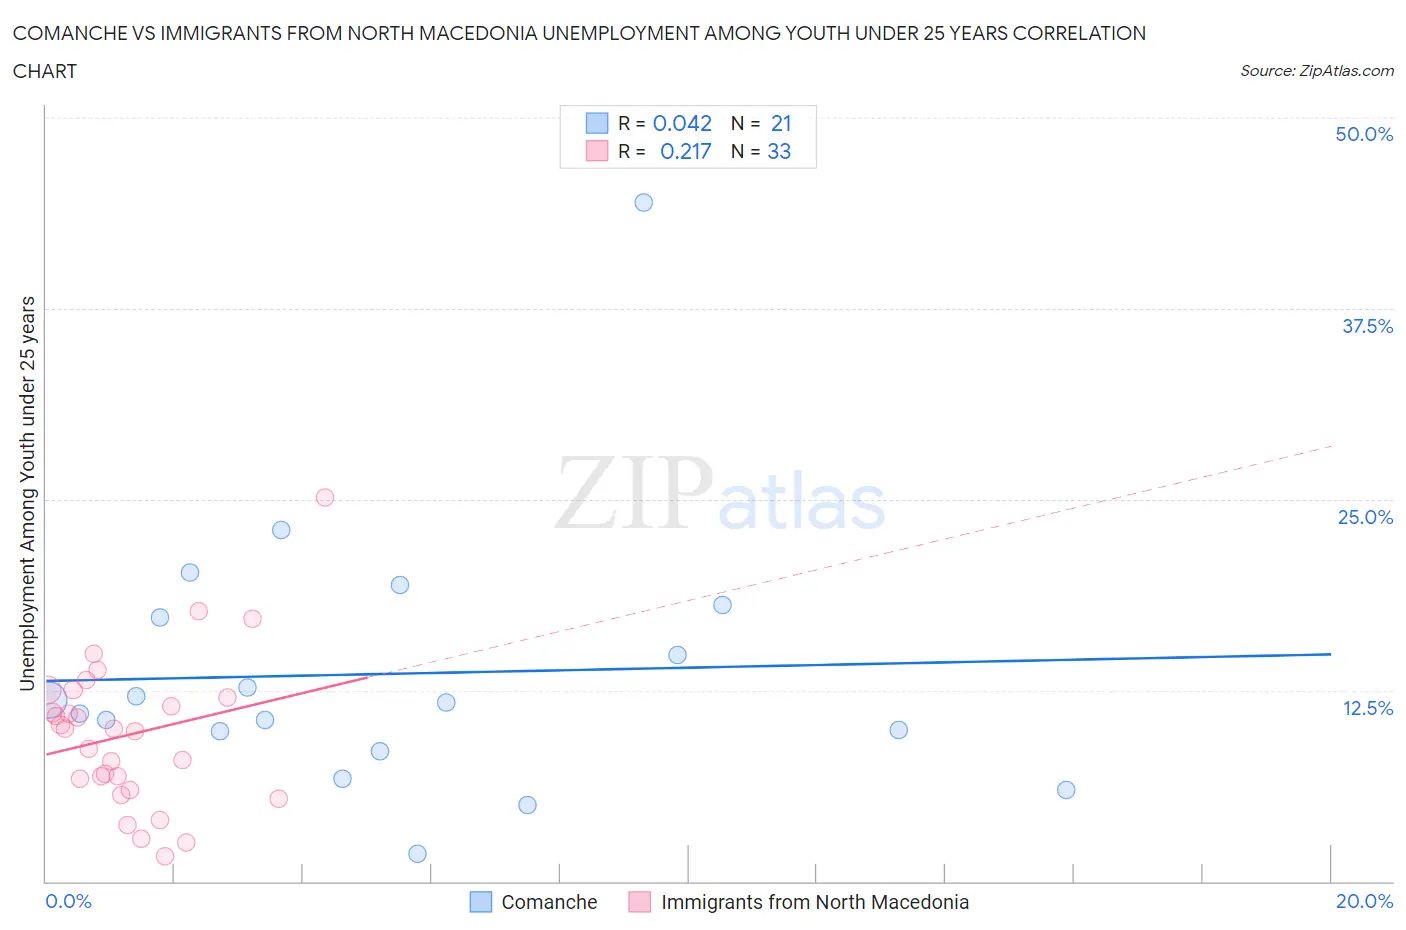 Comanche vs Immigrants from North Macedonia Unemployment Among Youth under 25 years